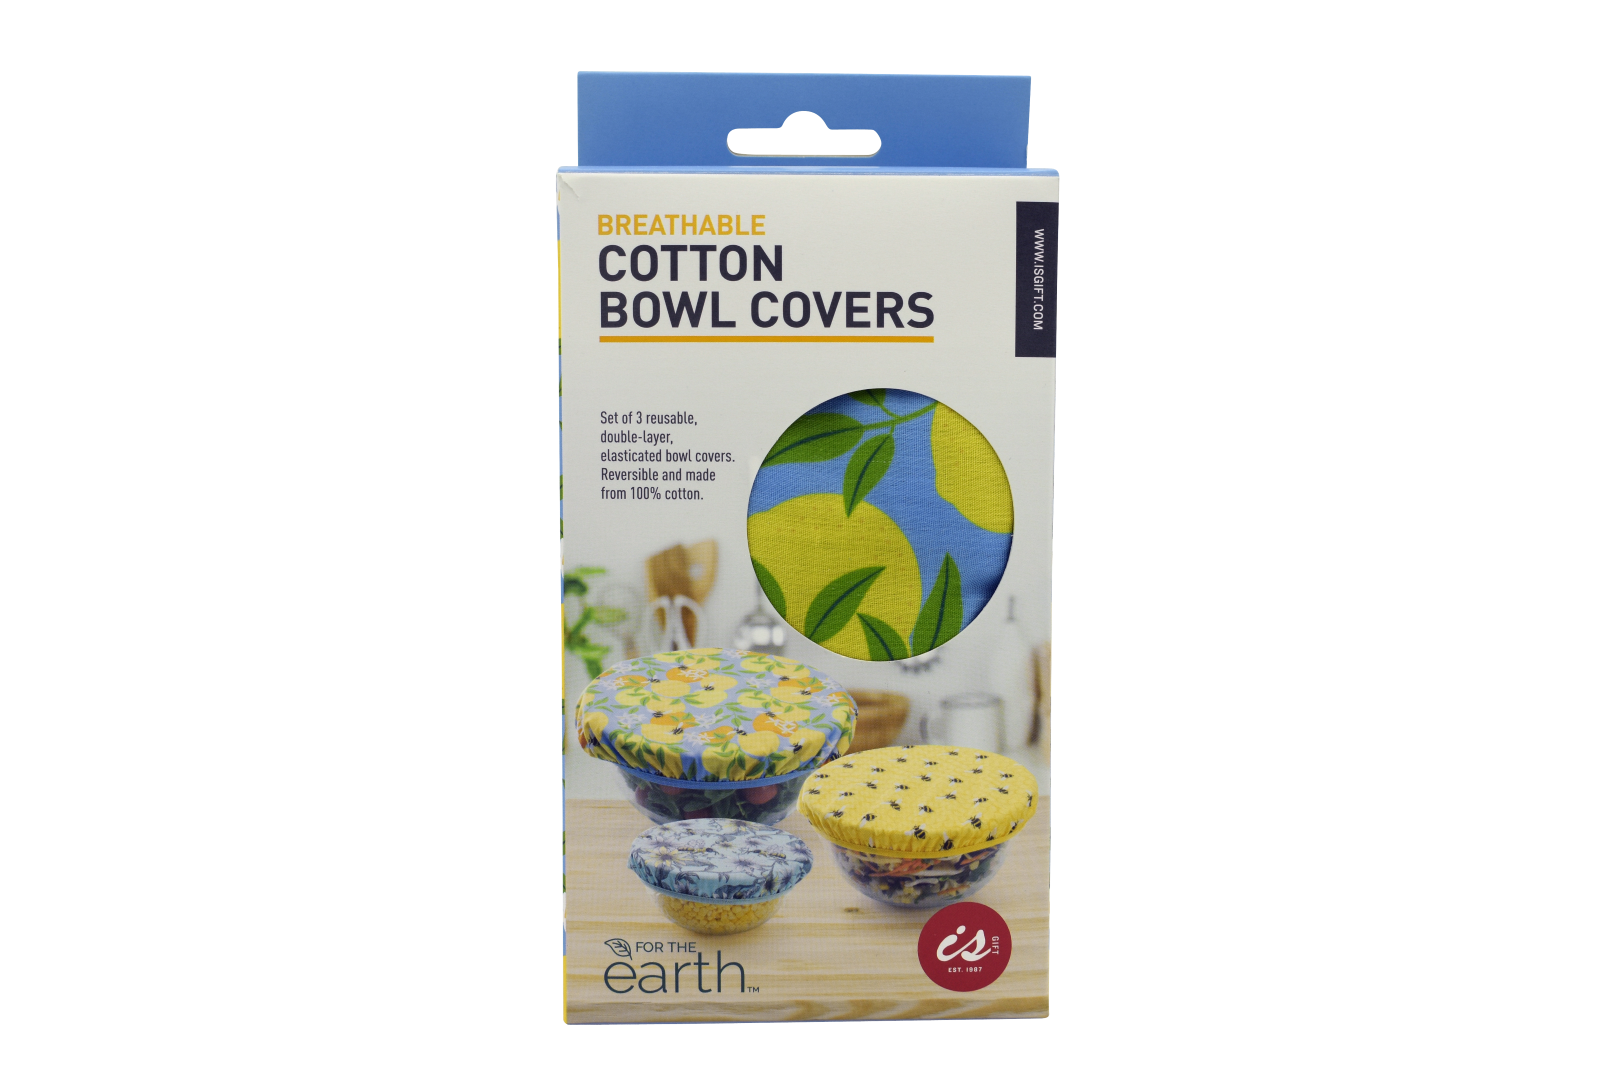 Breathable Cotton Bowl Covers - Set of 3